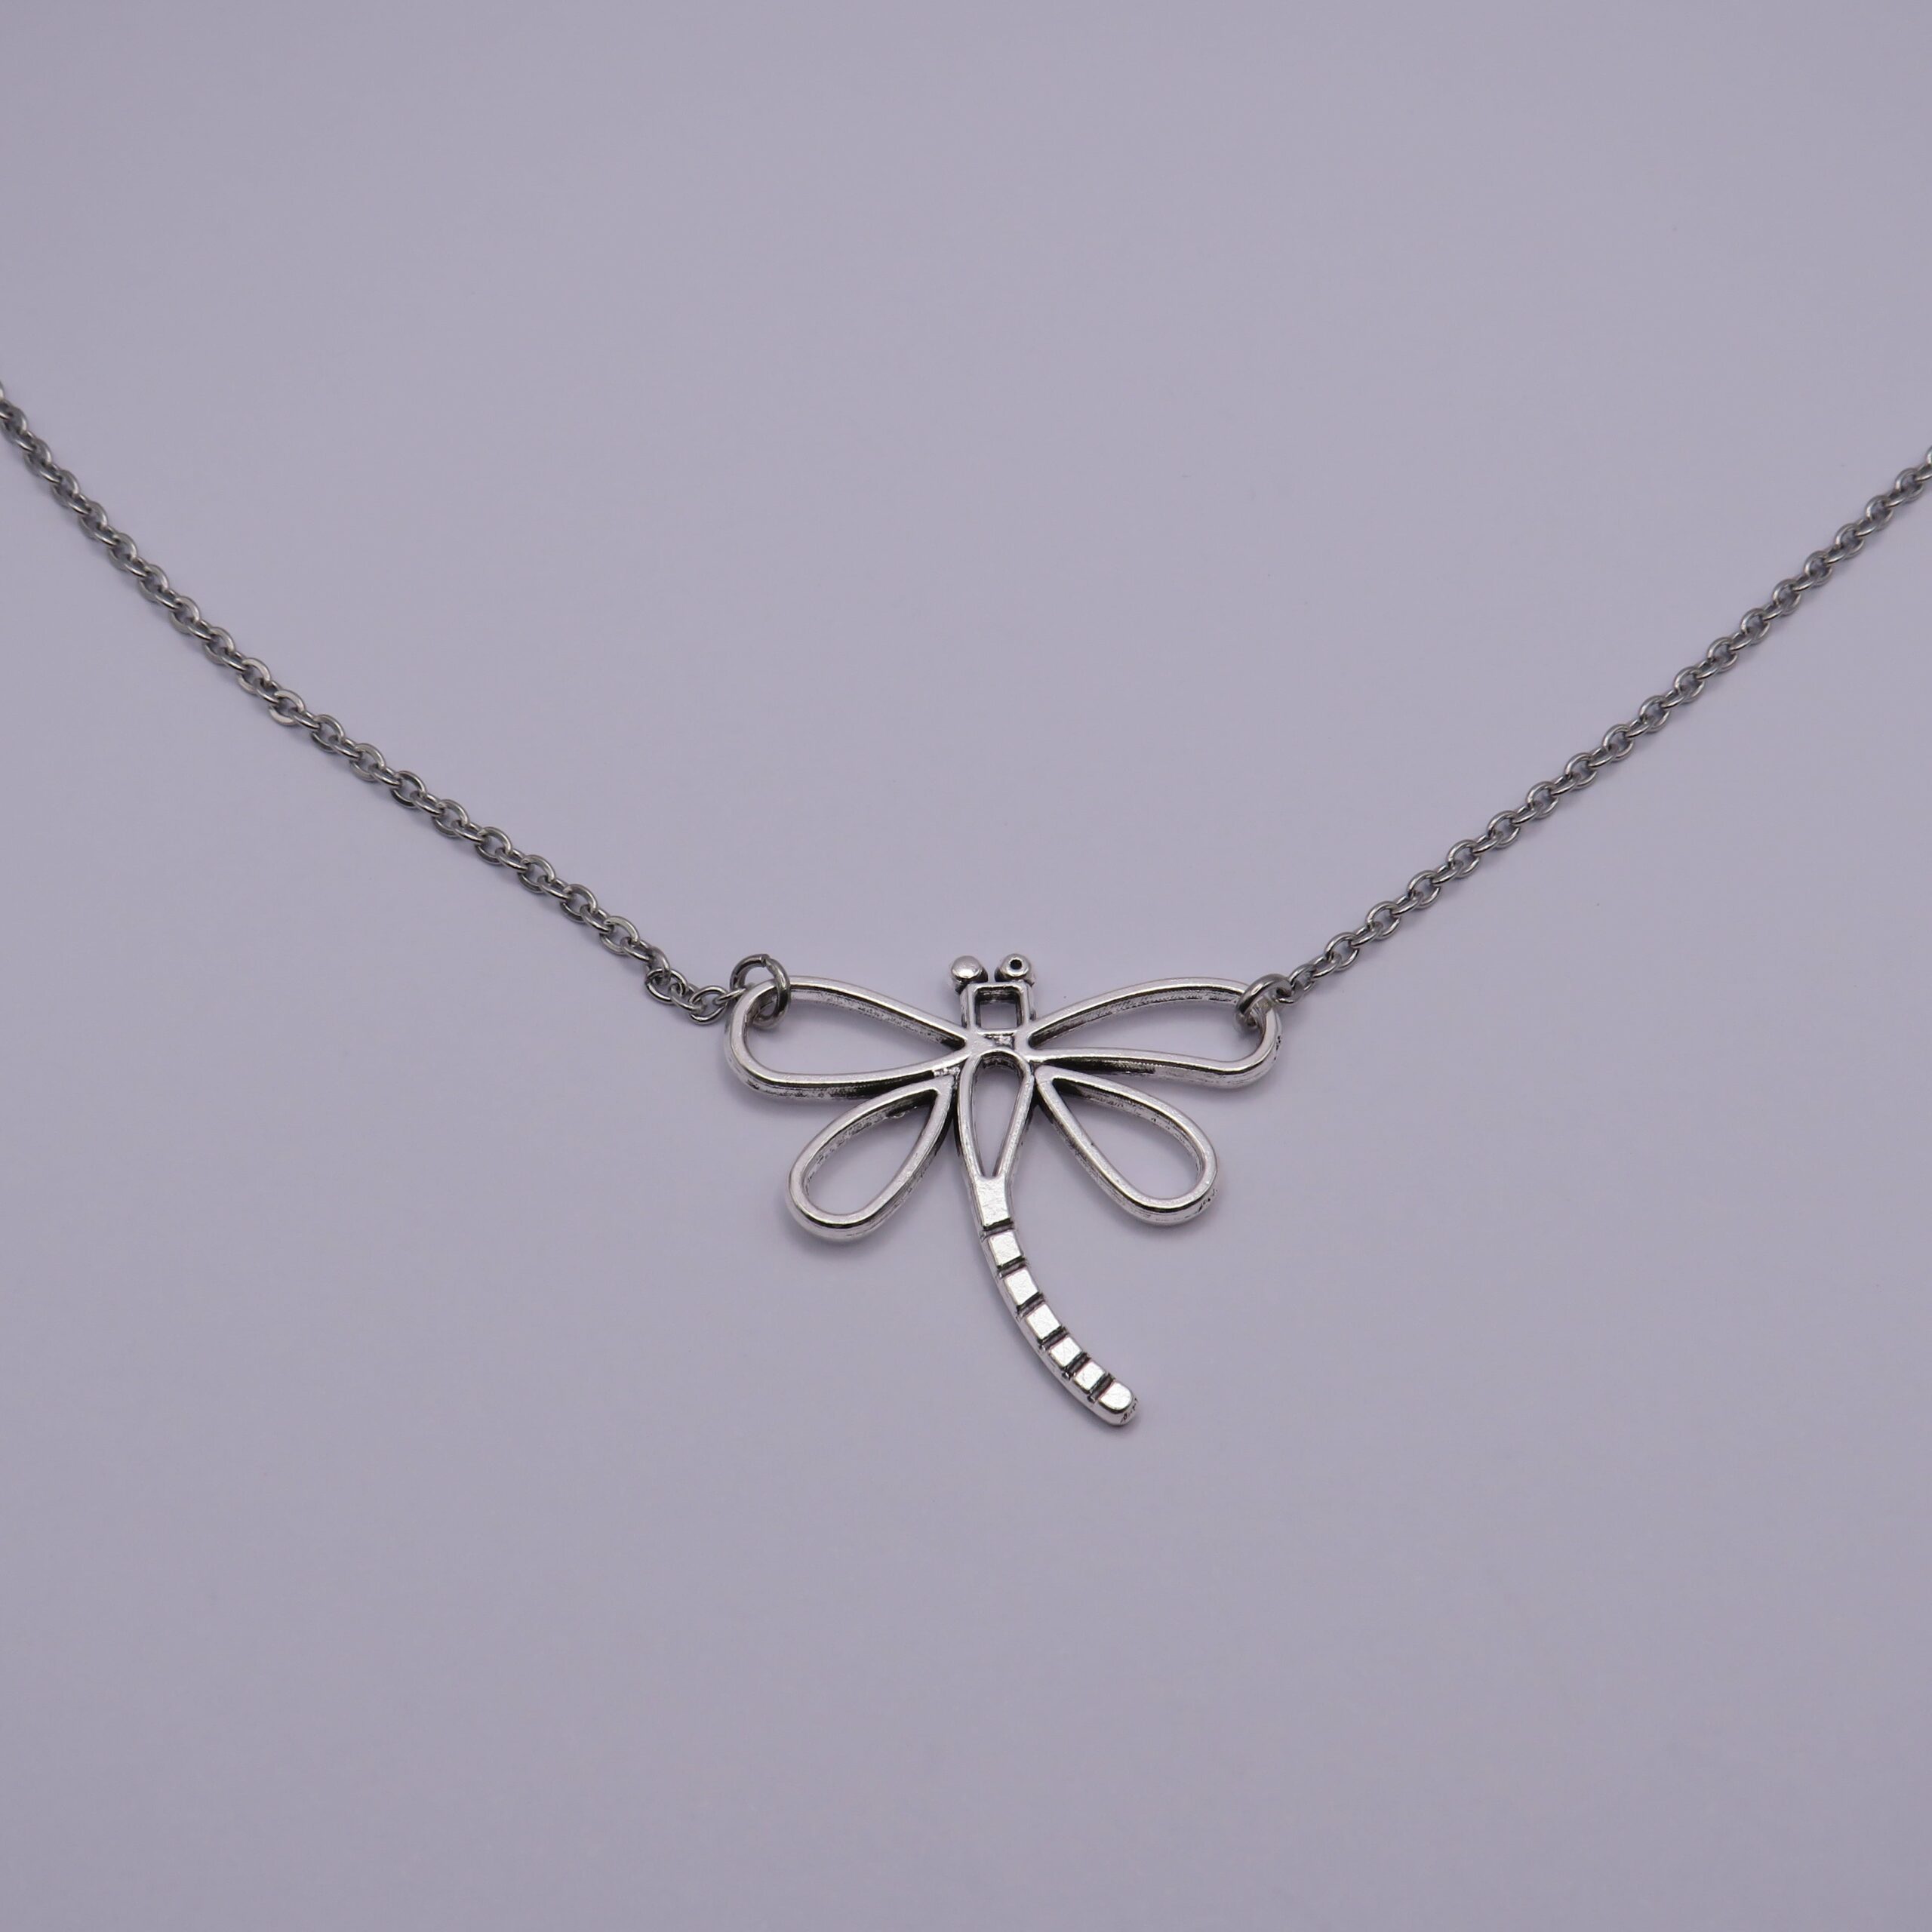 Stainless Steel Butterfly Chain Pendant Necklace